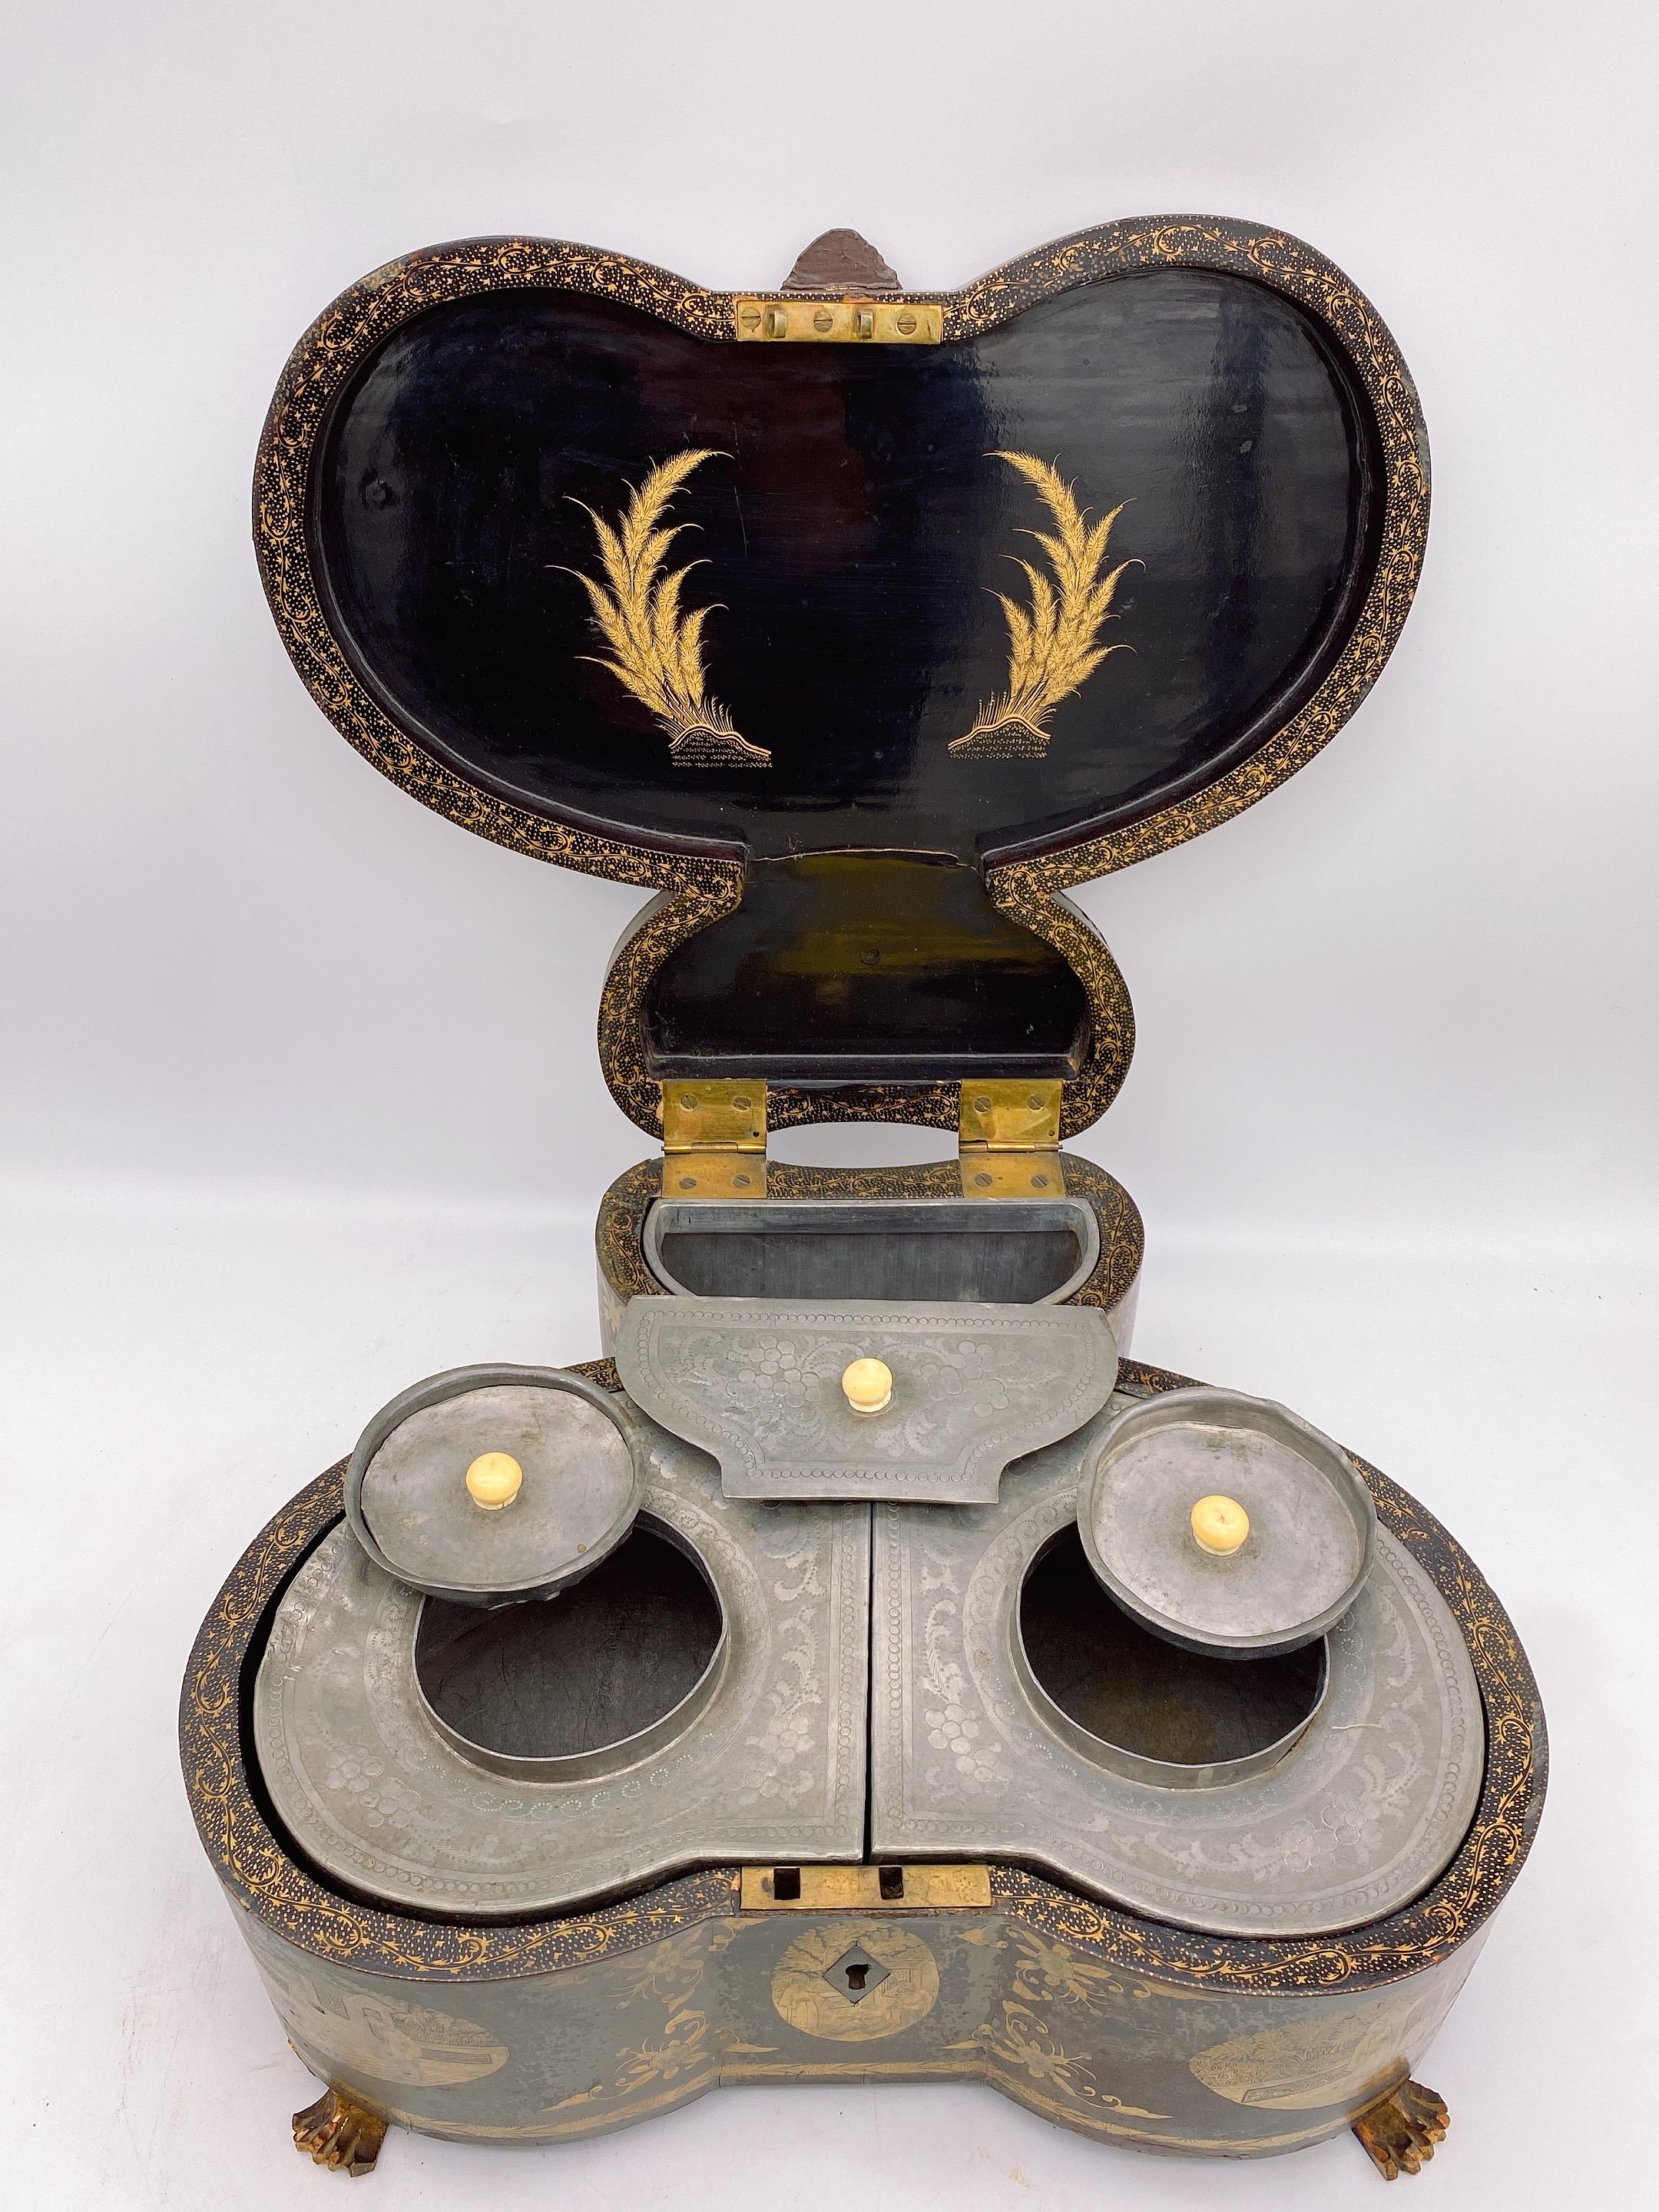 Rare 19th Century Antique Chinese Gilt Lacquer Butterfly Cased Pewter Tea Caddy For Sale 9